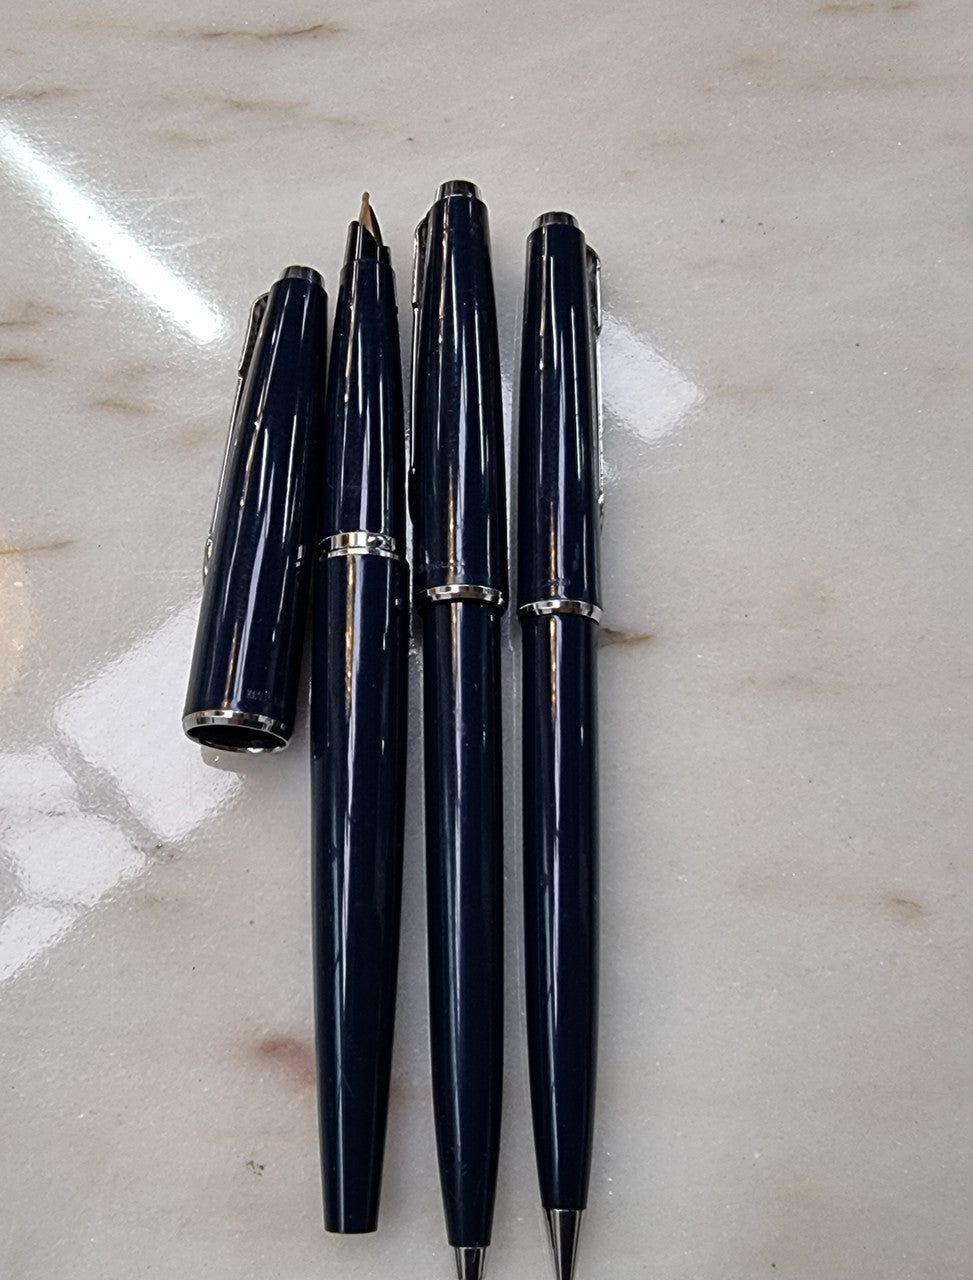 Vintage parker pen set, which consists of a fountain pen, ballpoint pen and pencil. All in original box and original receipt included.